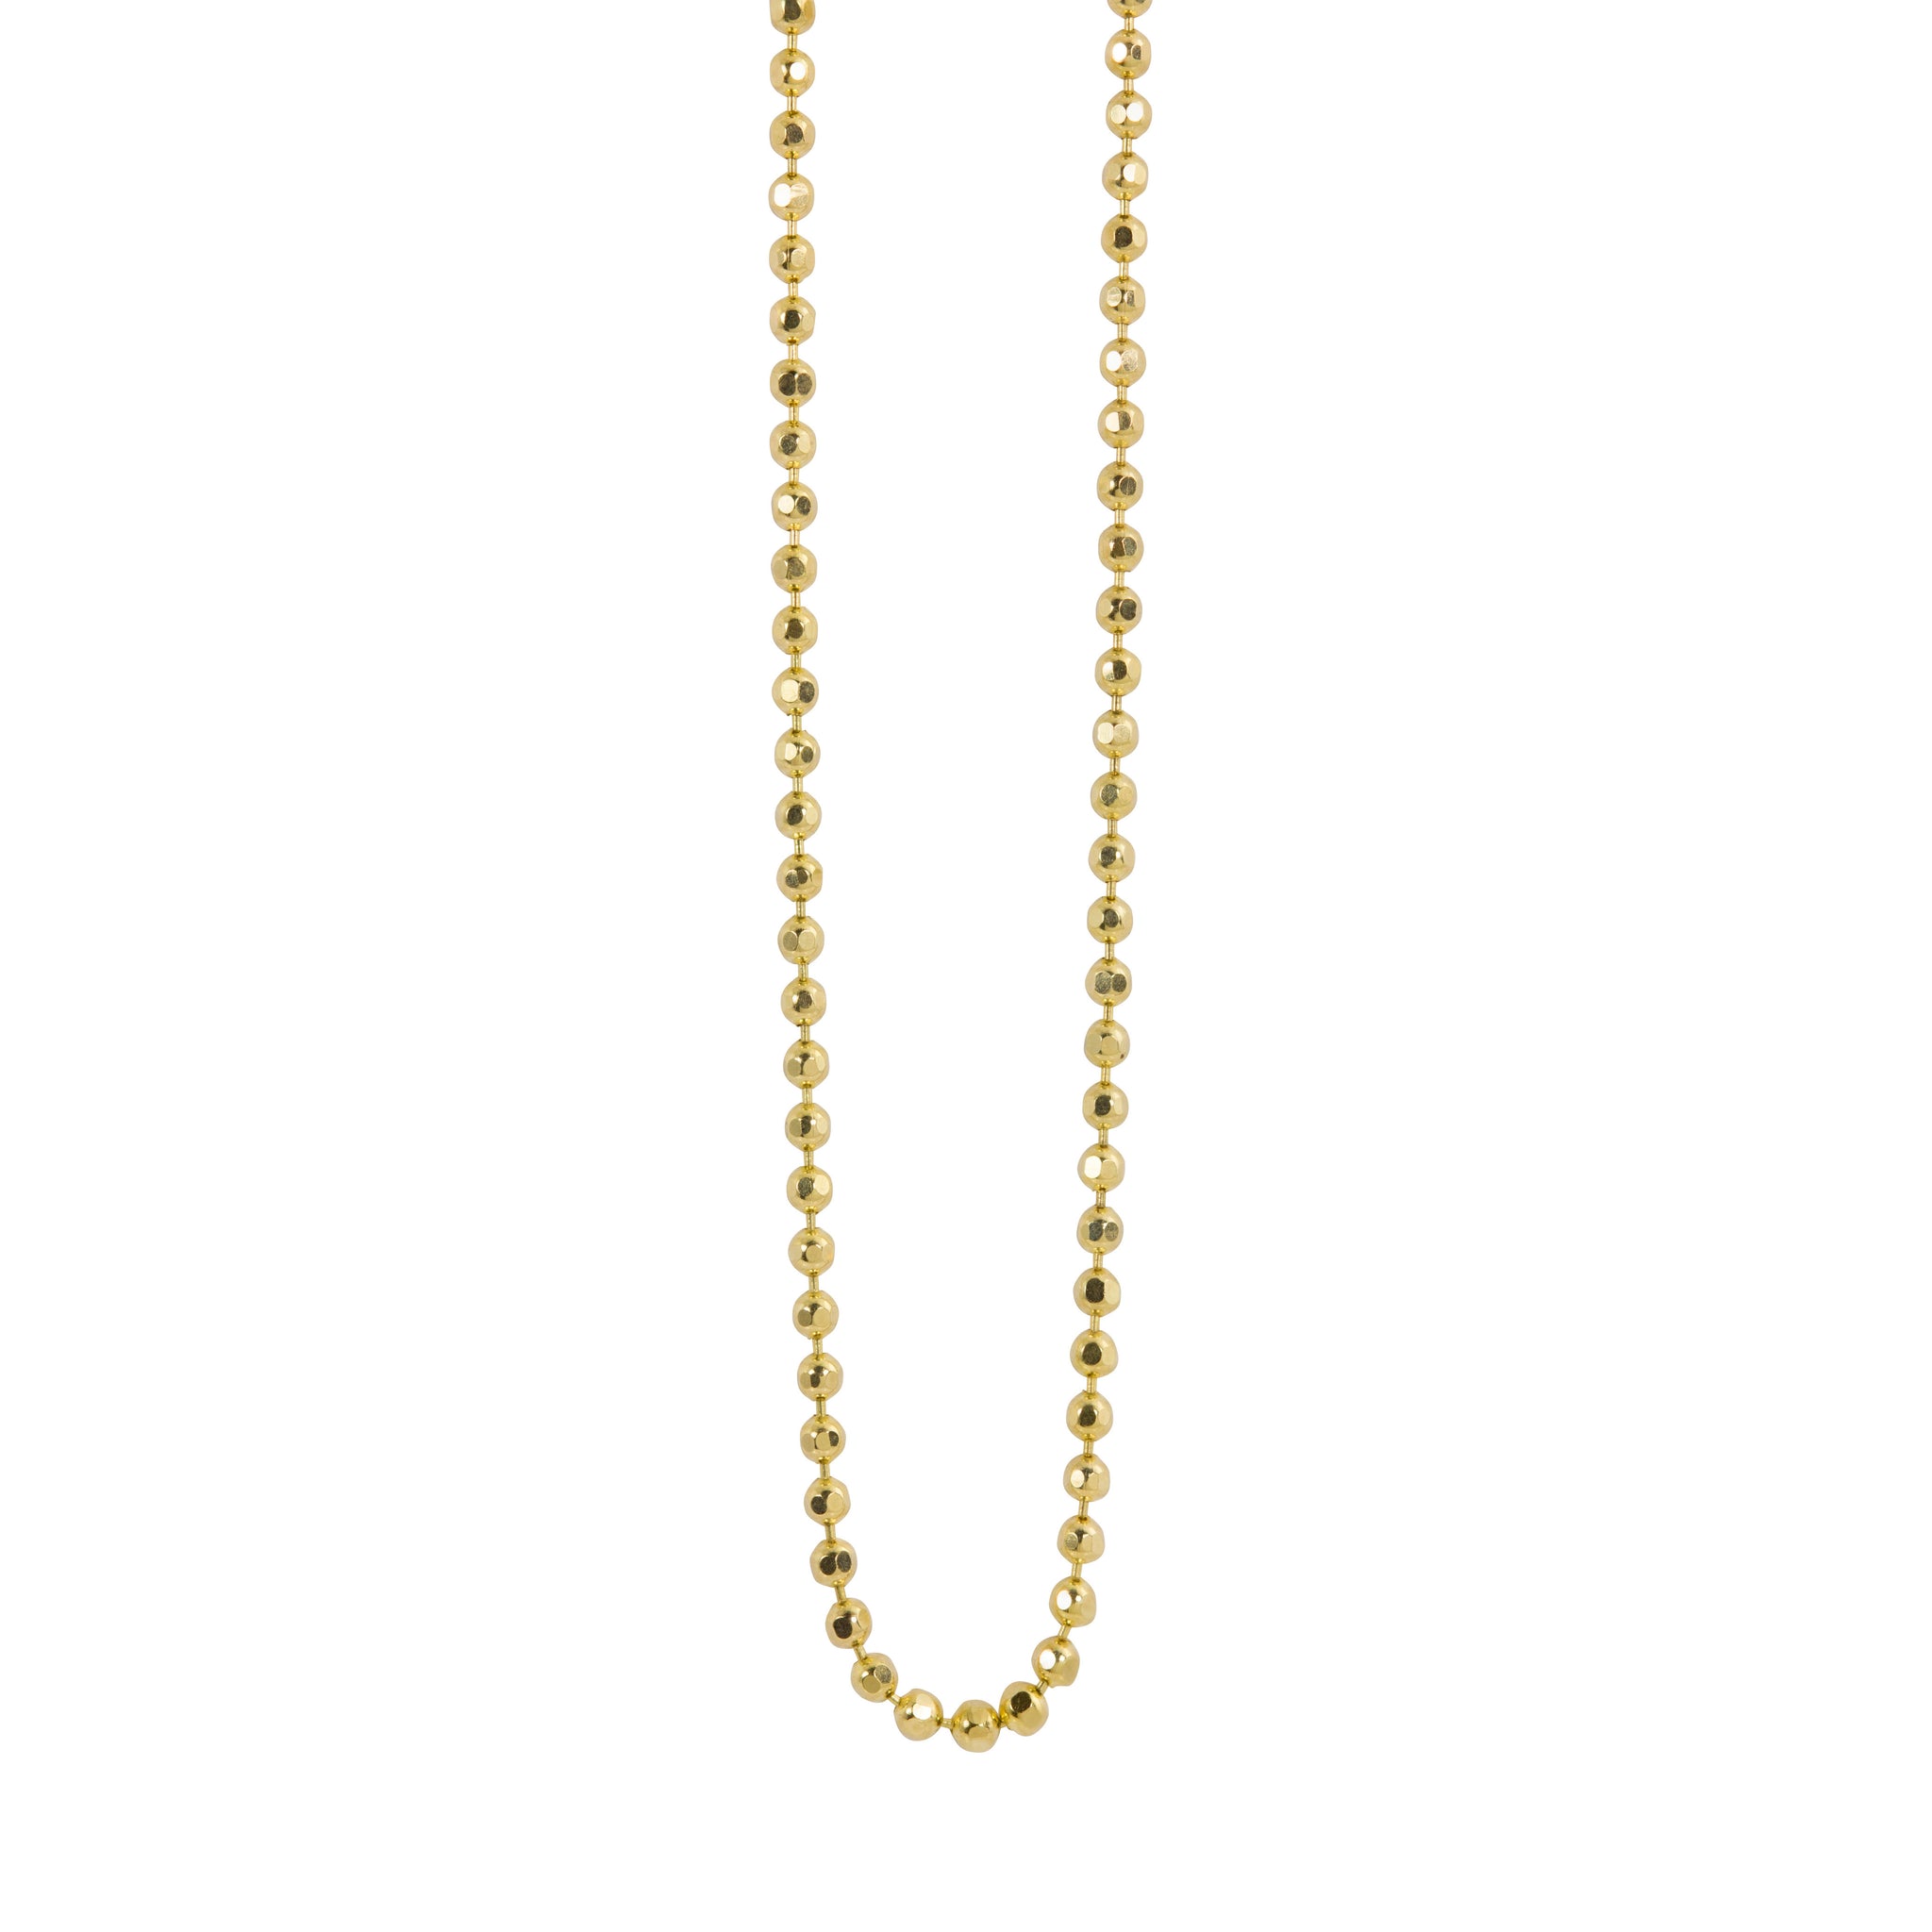 Beaded Chain Necklace - The Clear Cut Collection 14K Yellow / 16in